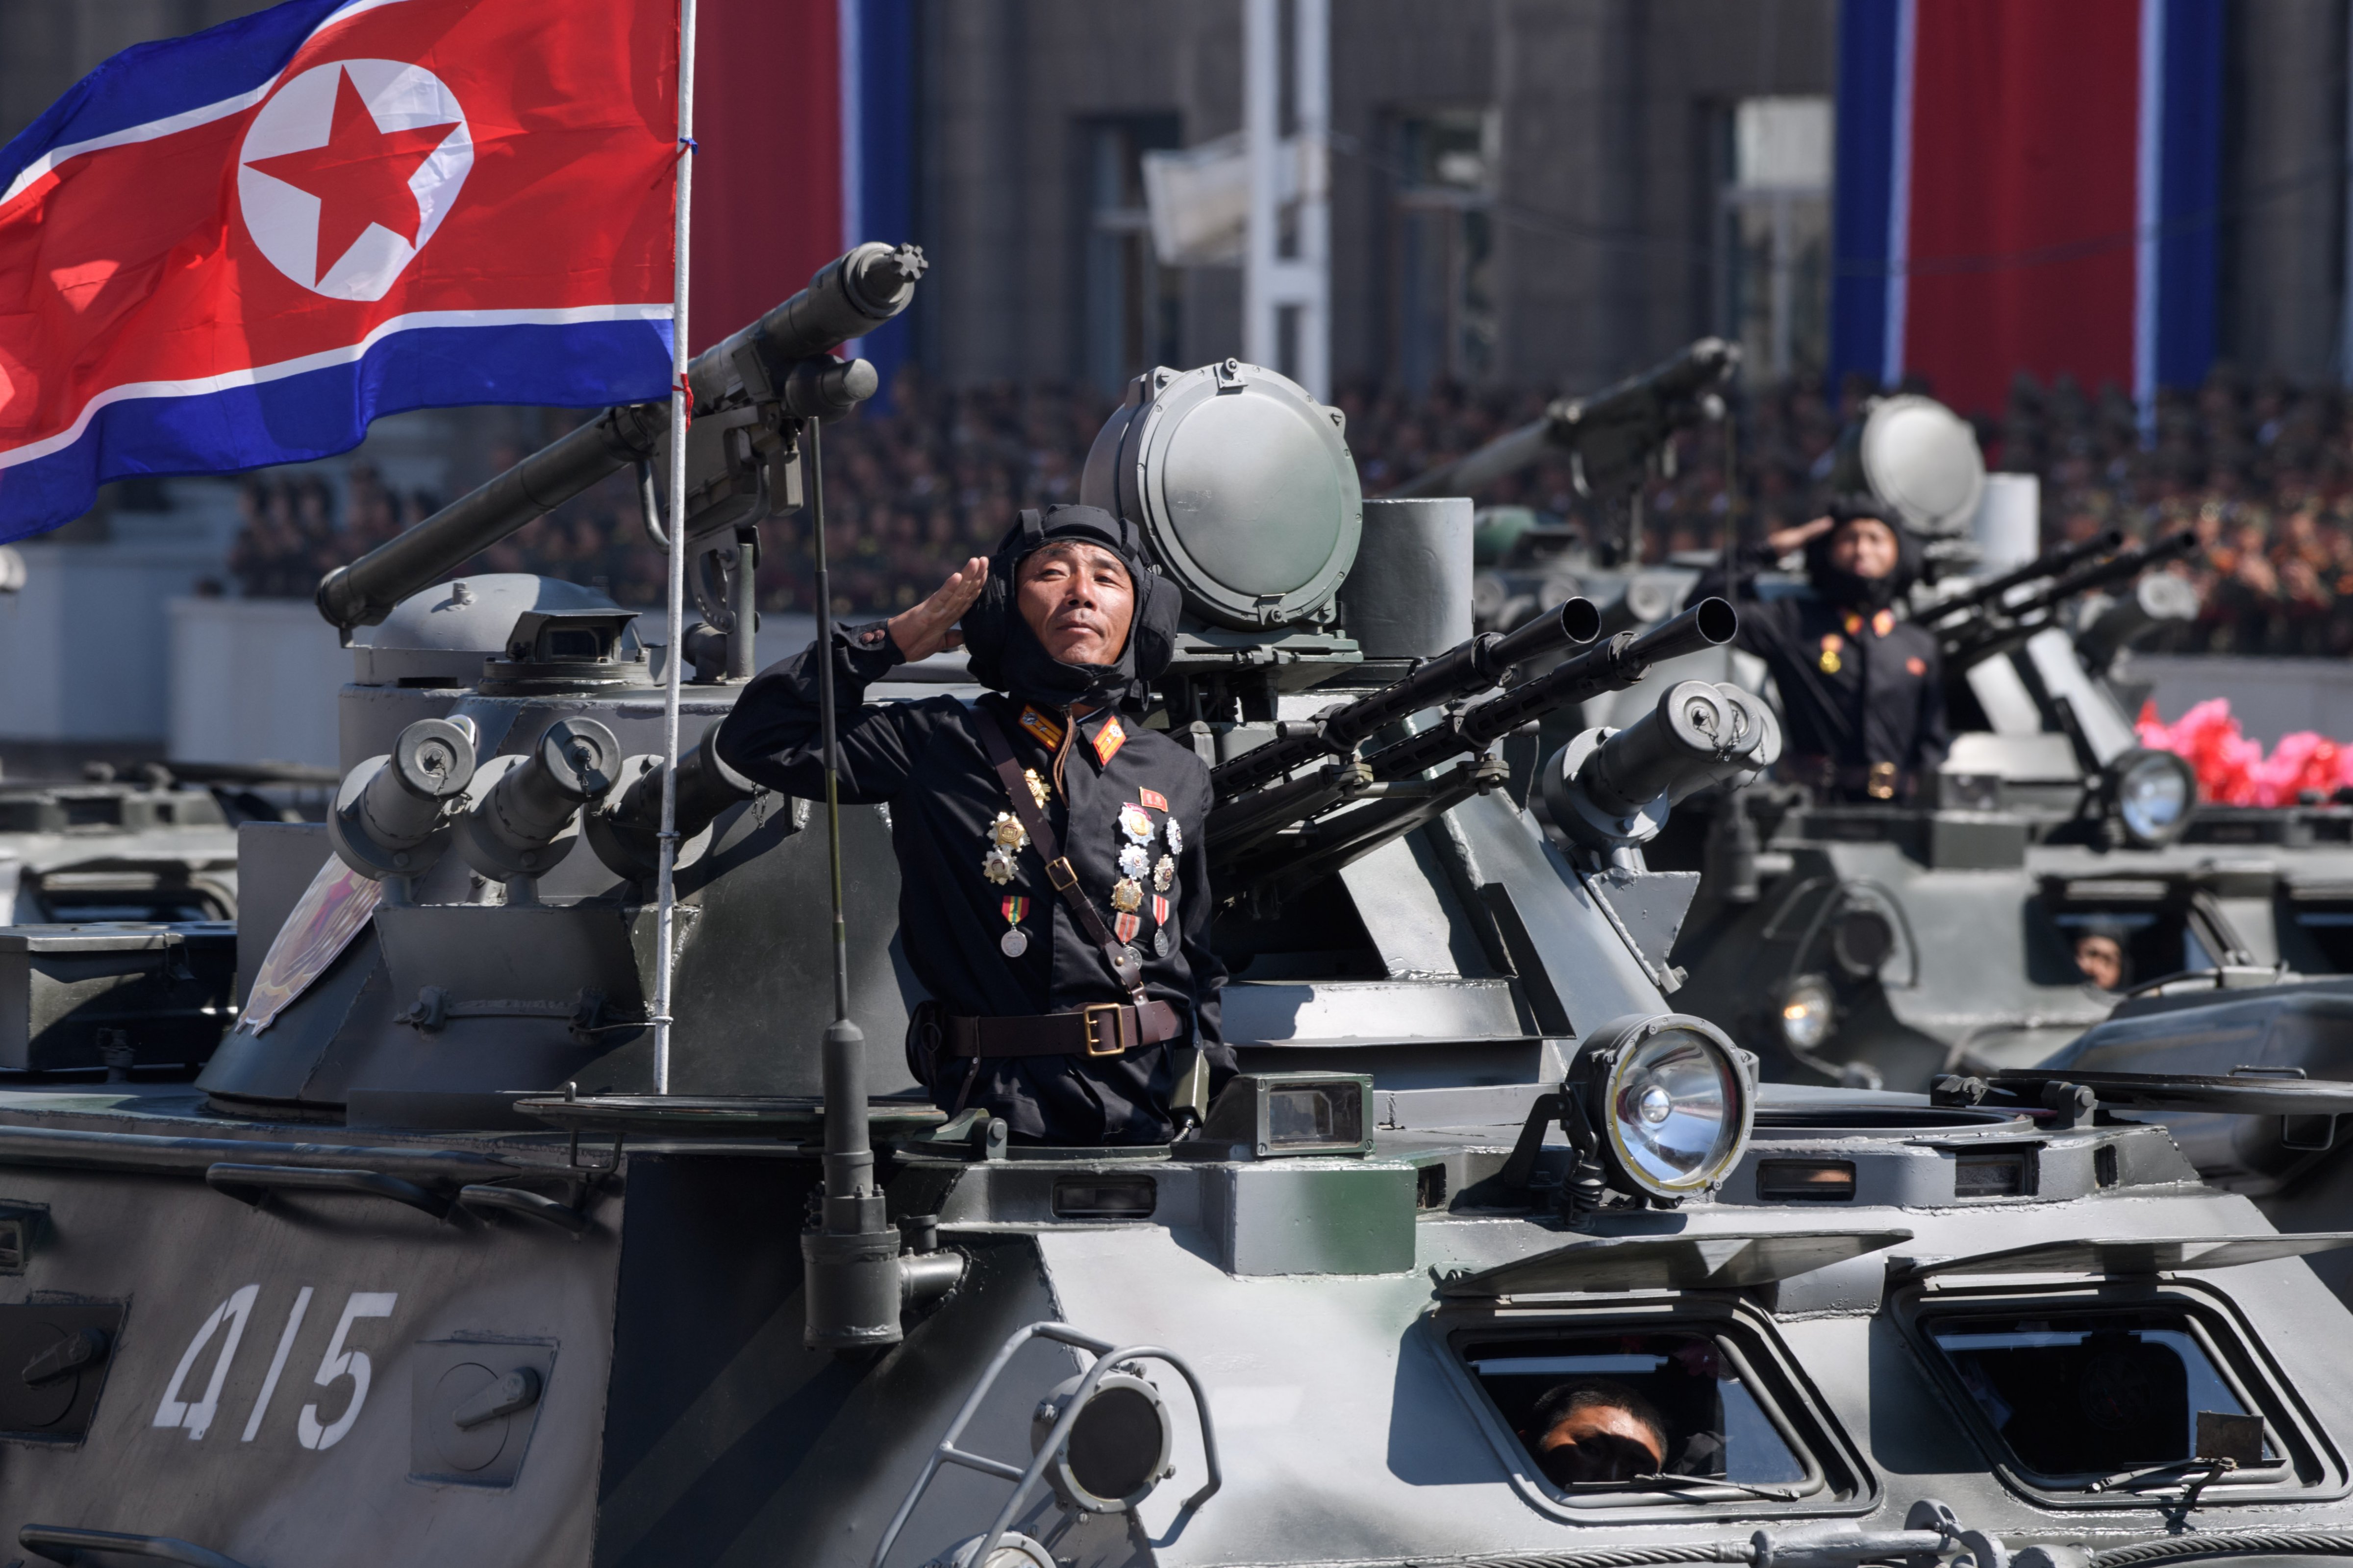 Korean People's Army (KPA) soldiers stand atop armored vehicles during a military parade in Pyongyang, North Korea on Sept. 9, 2018. (Ed Jones—AFP/Getty Images)